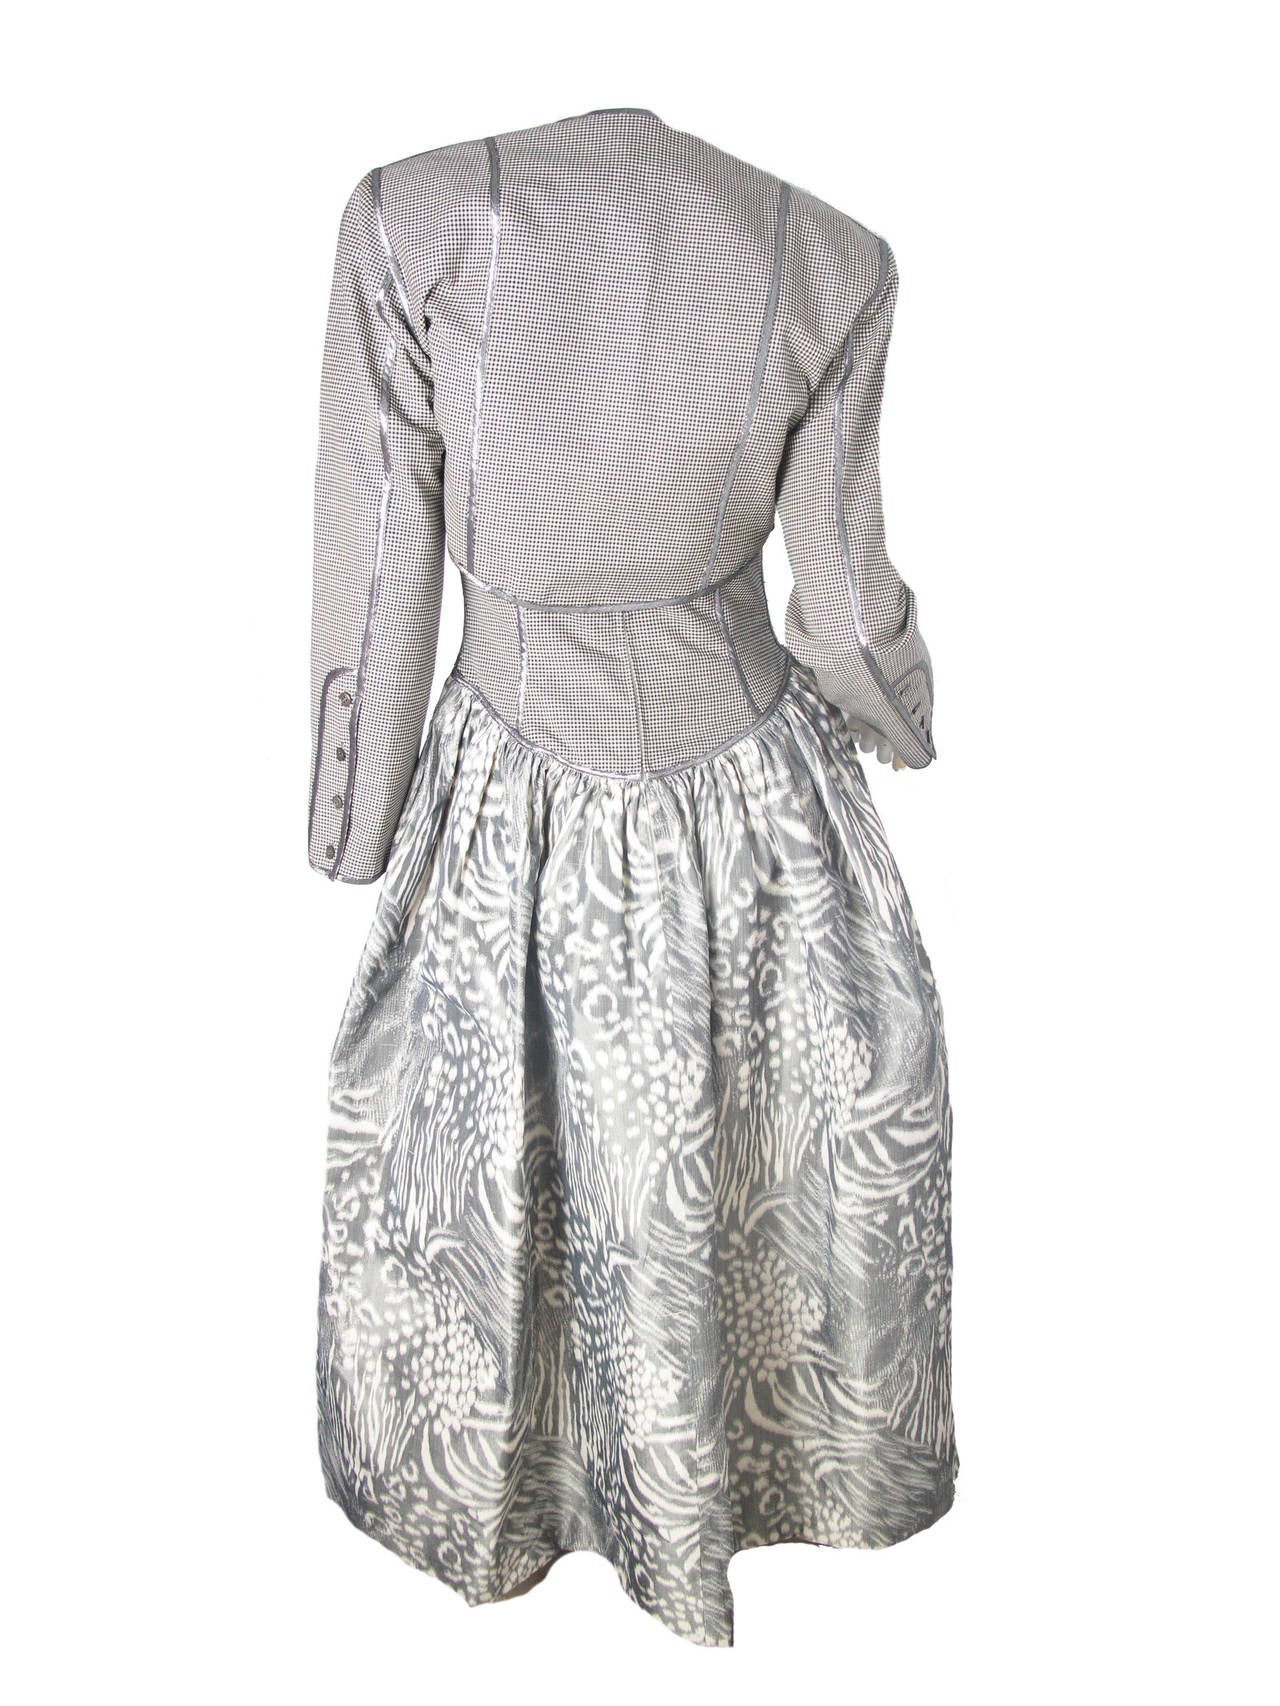 Geoffrey Beene Gown with Jacket, 1980s For Sale 1